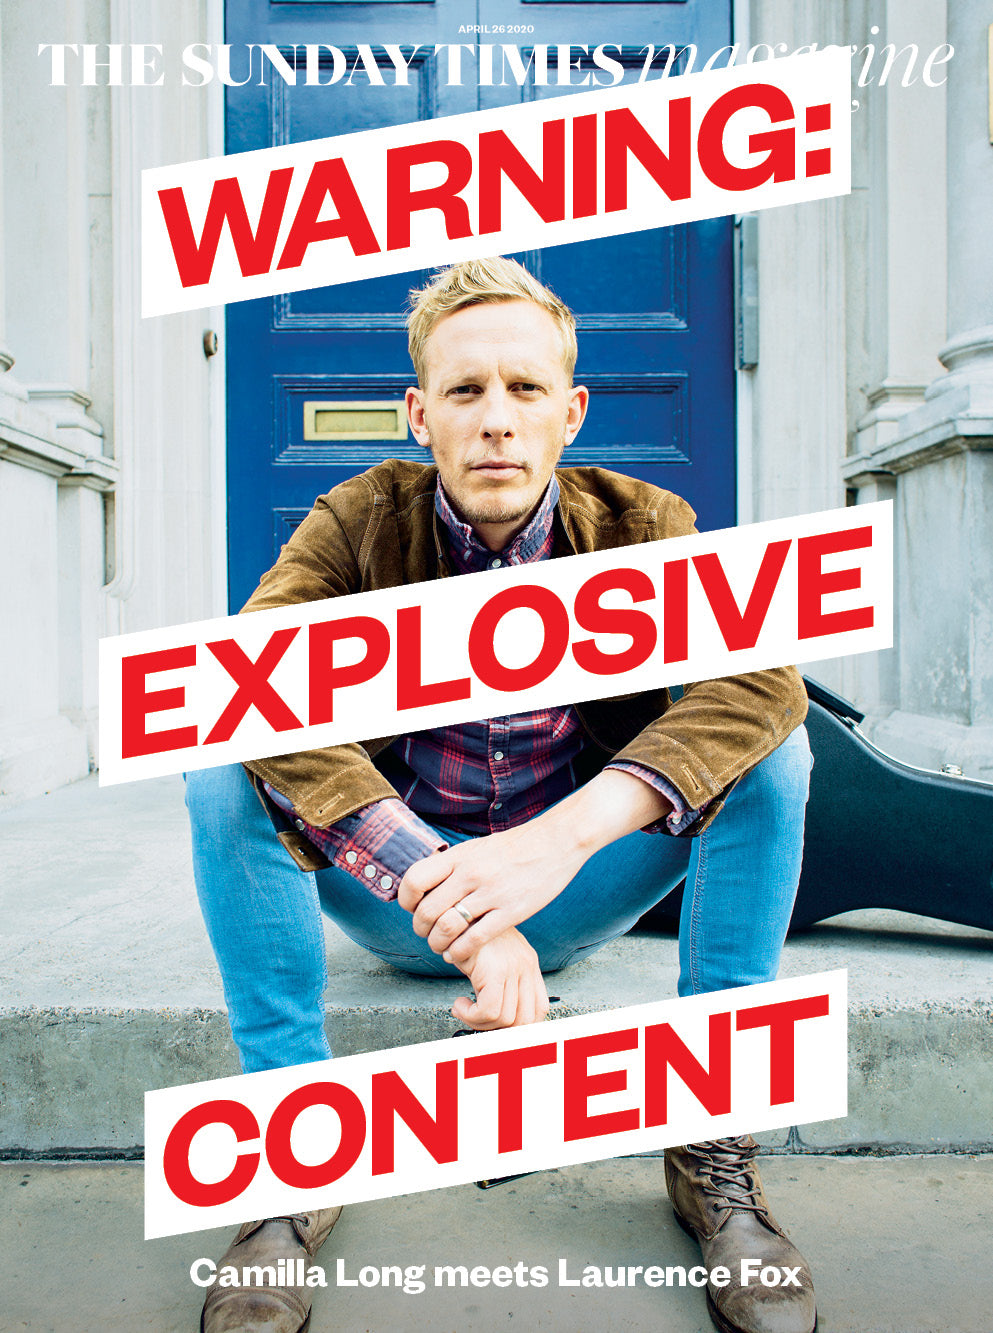 UK Sunday Times Magazine April 2020: Laurence Fox Exclusive